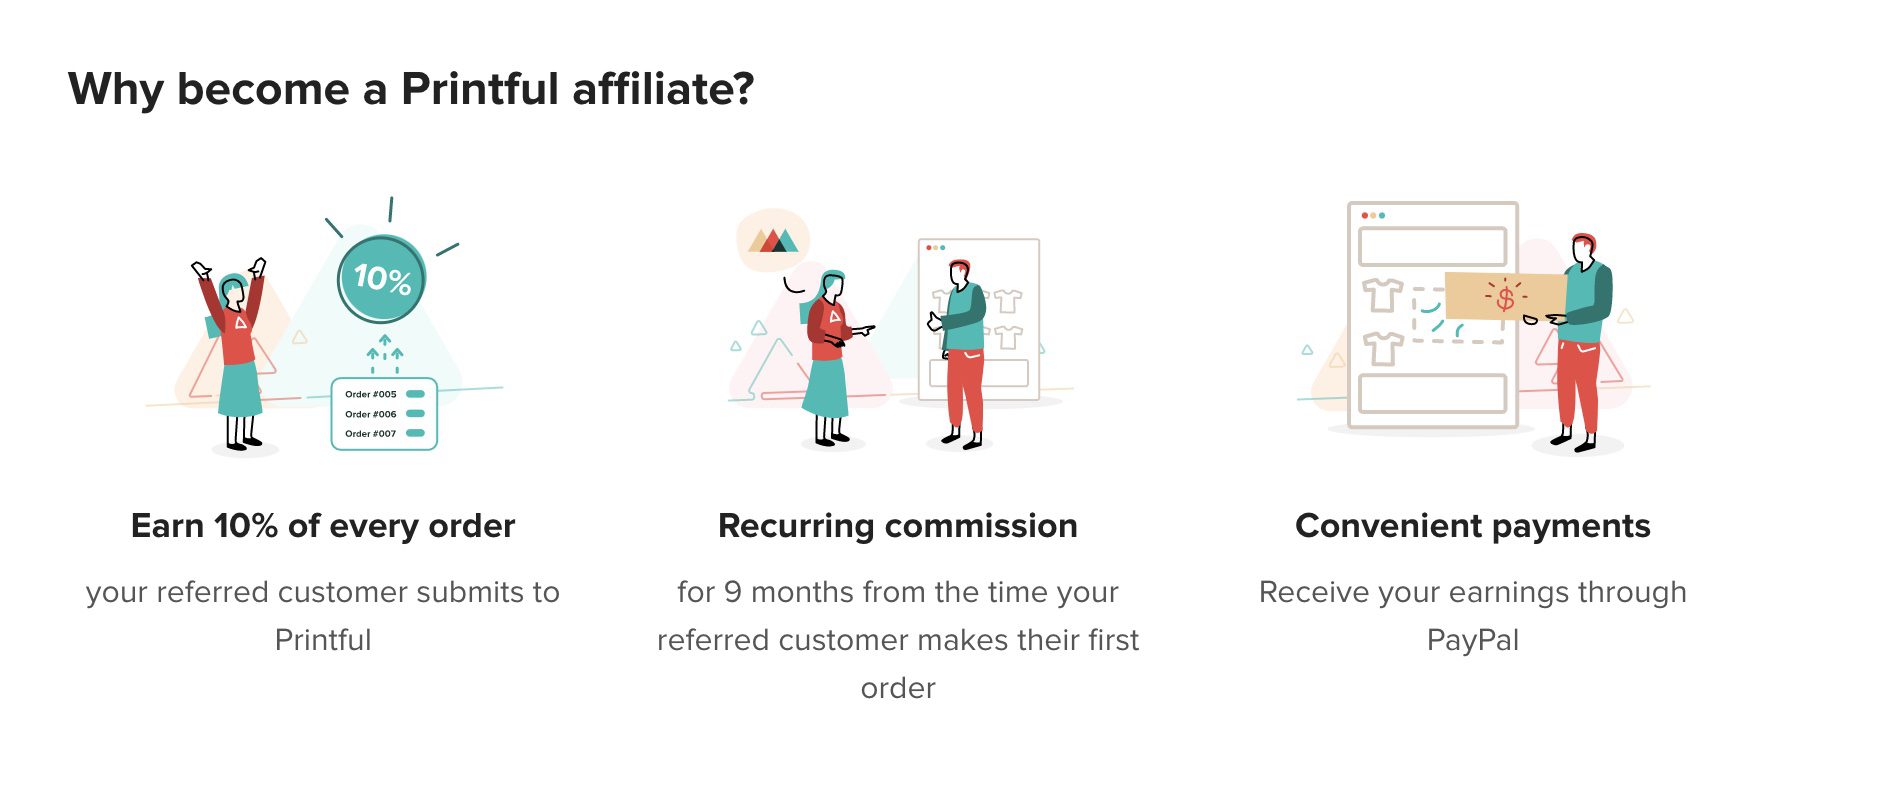 Printful's Affiliate Program offers an exciting opportunity for entrepreneurs to make extra money while sharing their passion for Printful products with others. With this program, you can earn up to 10% commission on each sale generated using your affiliate link.